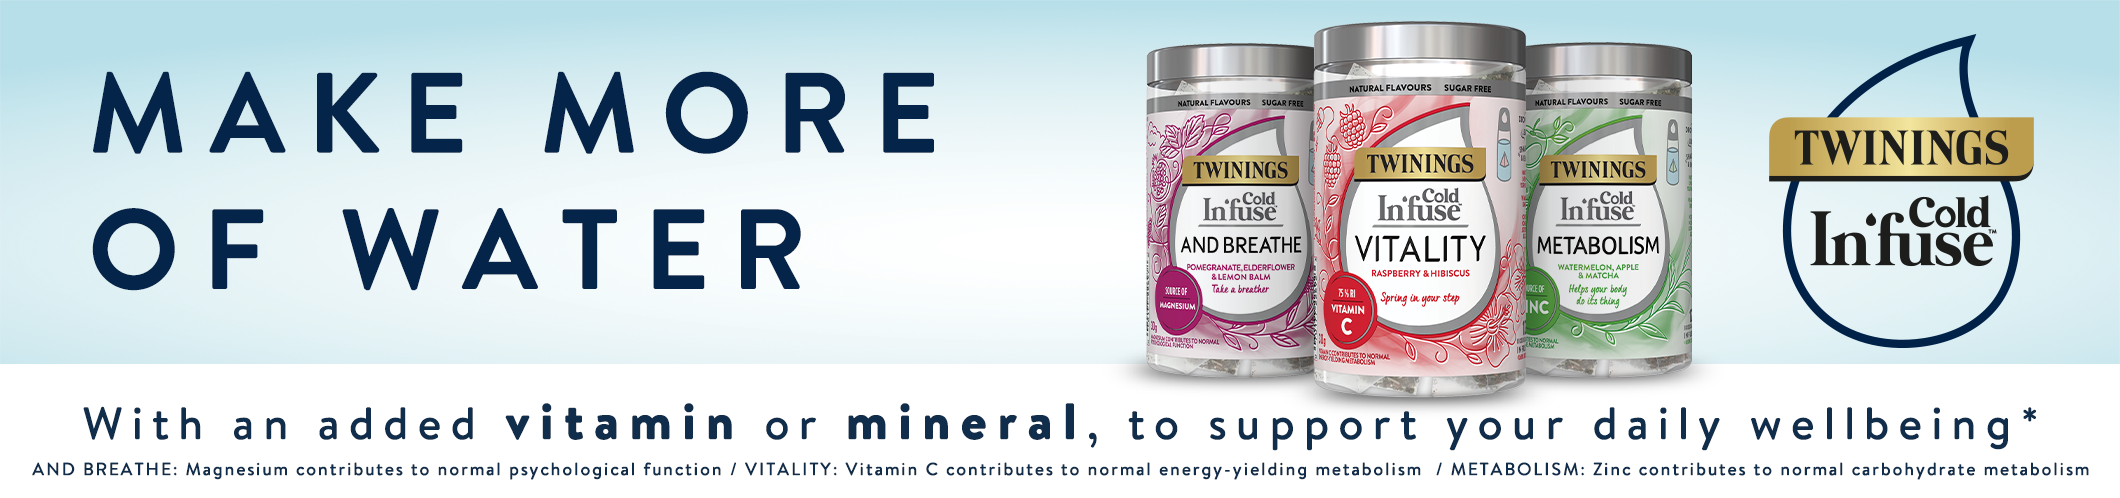 Twinings Cold Infuse - Make More of Water